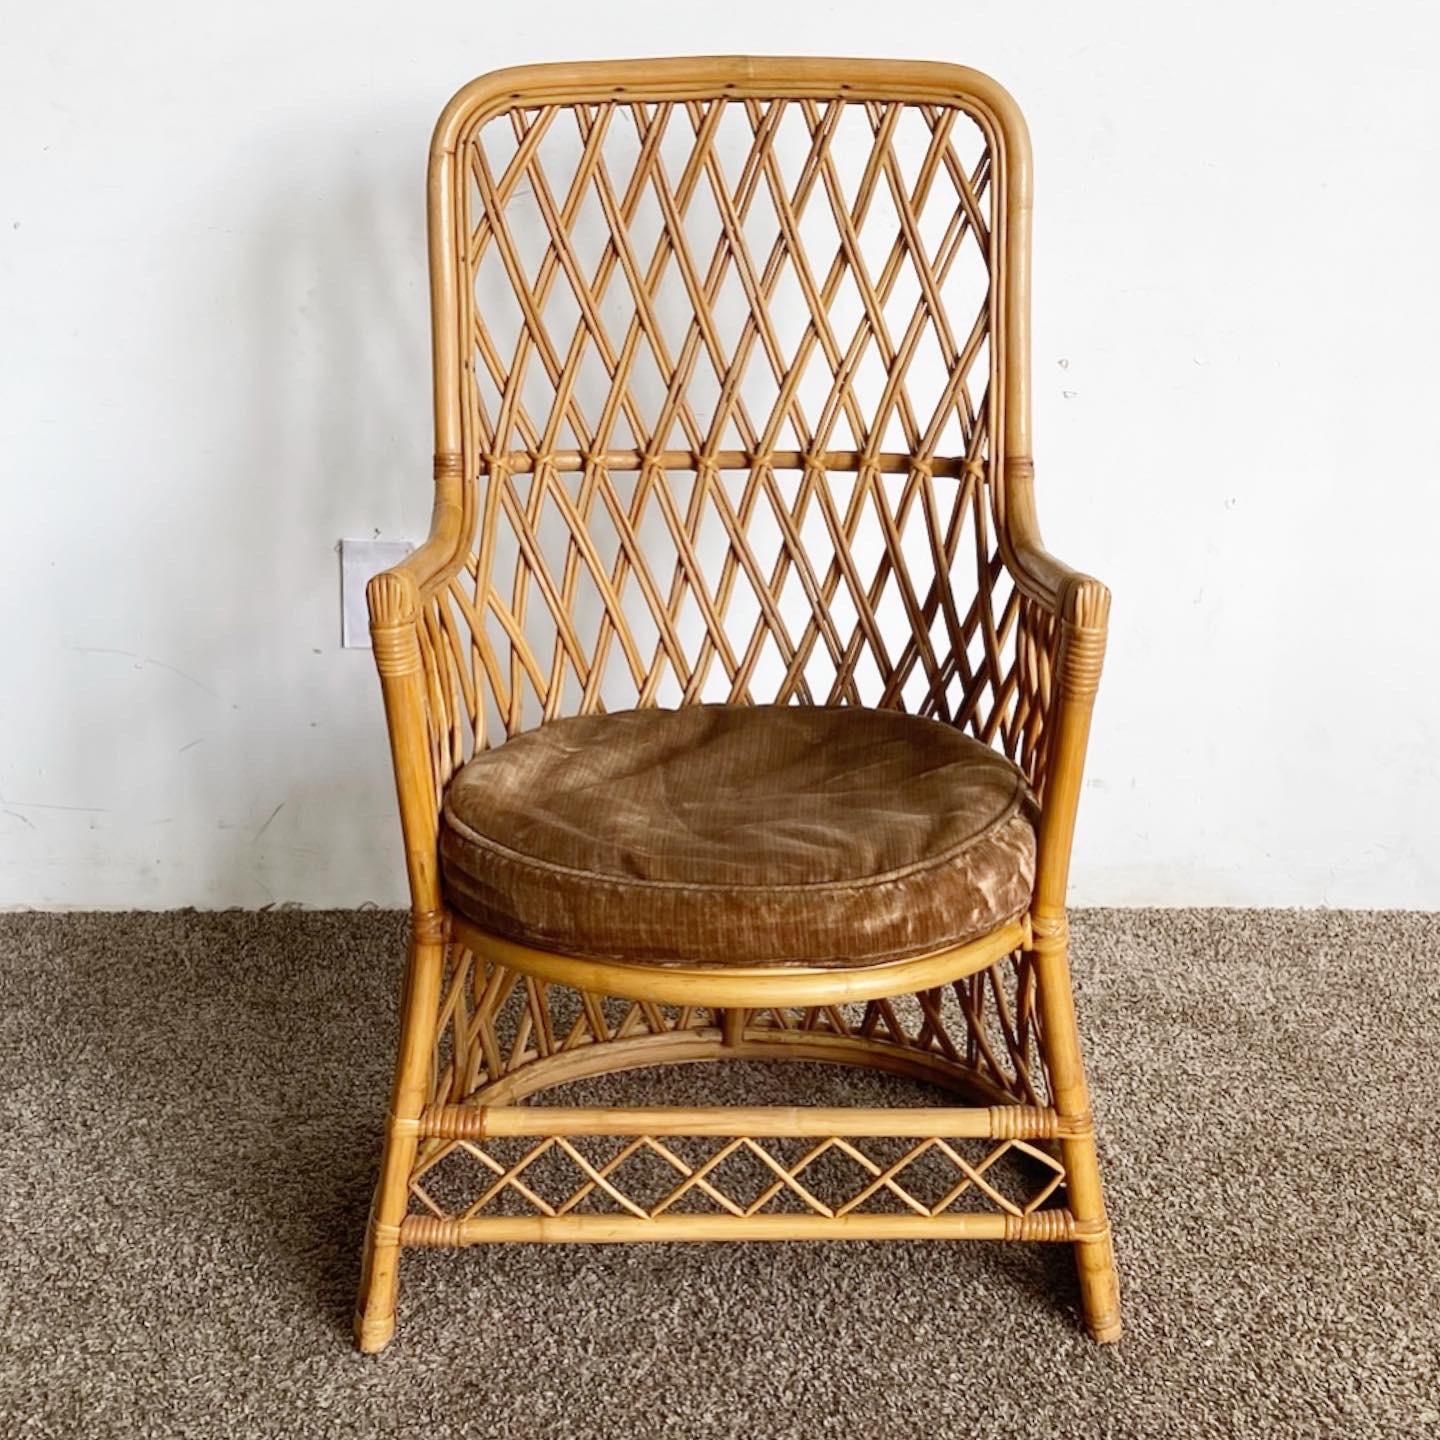 Presenting our Boho Chic Bamboo Rattan Side Chair, a fusion of bohemian aesthetics and natural textures. This stylish chair, crafted from bamboo and rattan, showcases a comfortable circular brown seat cushion and a unique design that complements